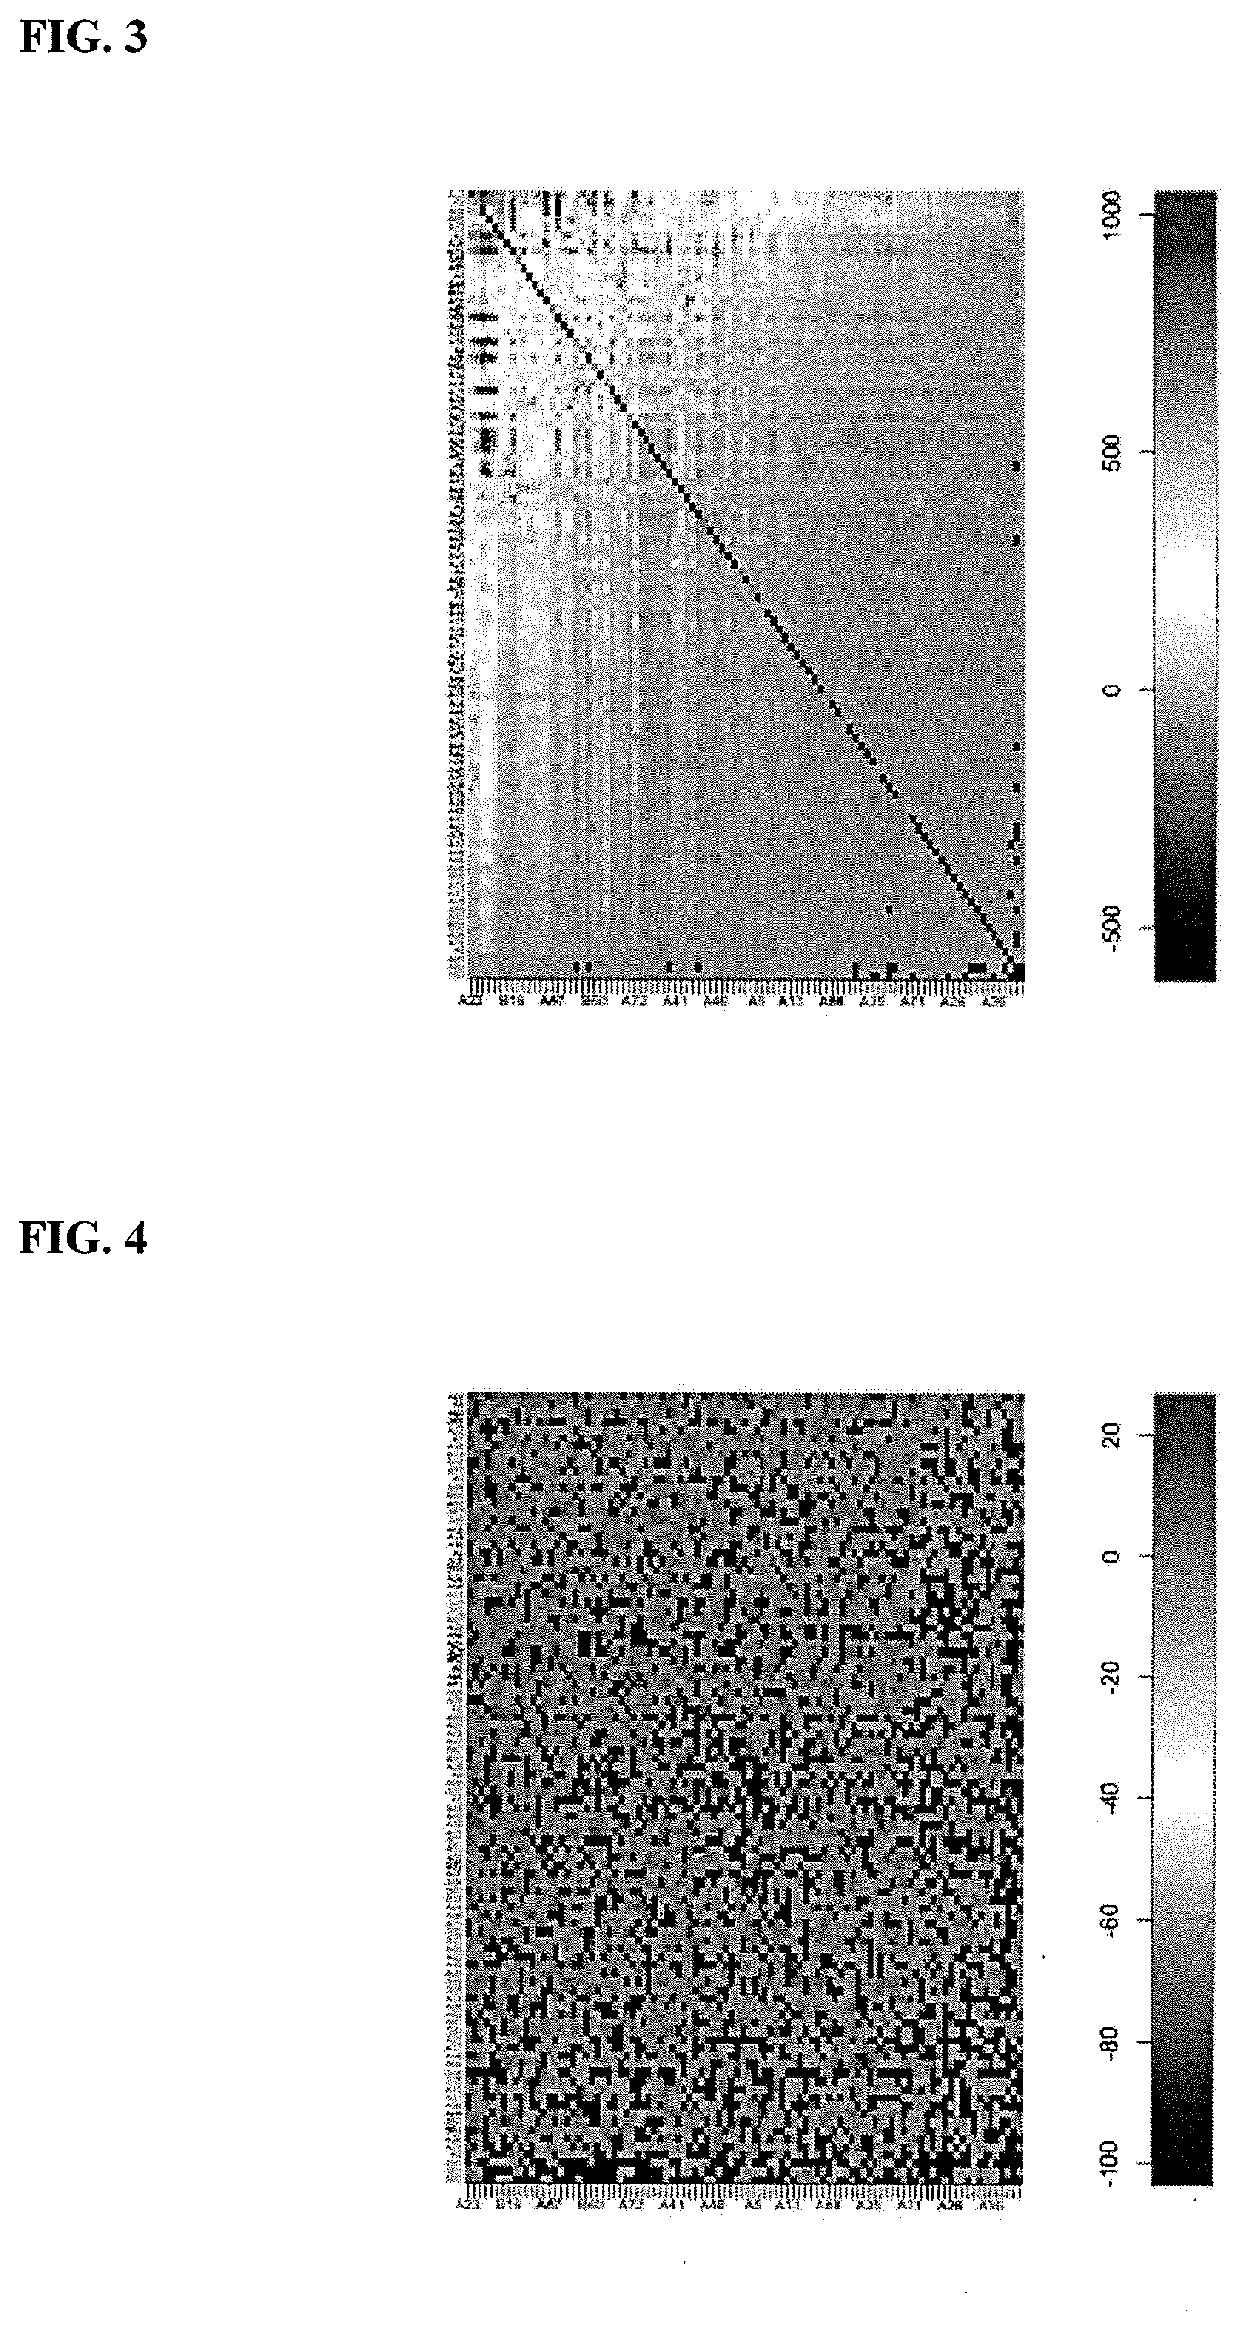 Methods of Suppressing Adaptor Dimer Formation in Deep Sequencing Library Preparation